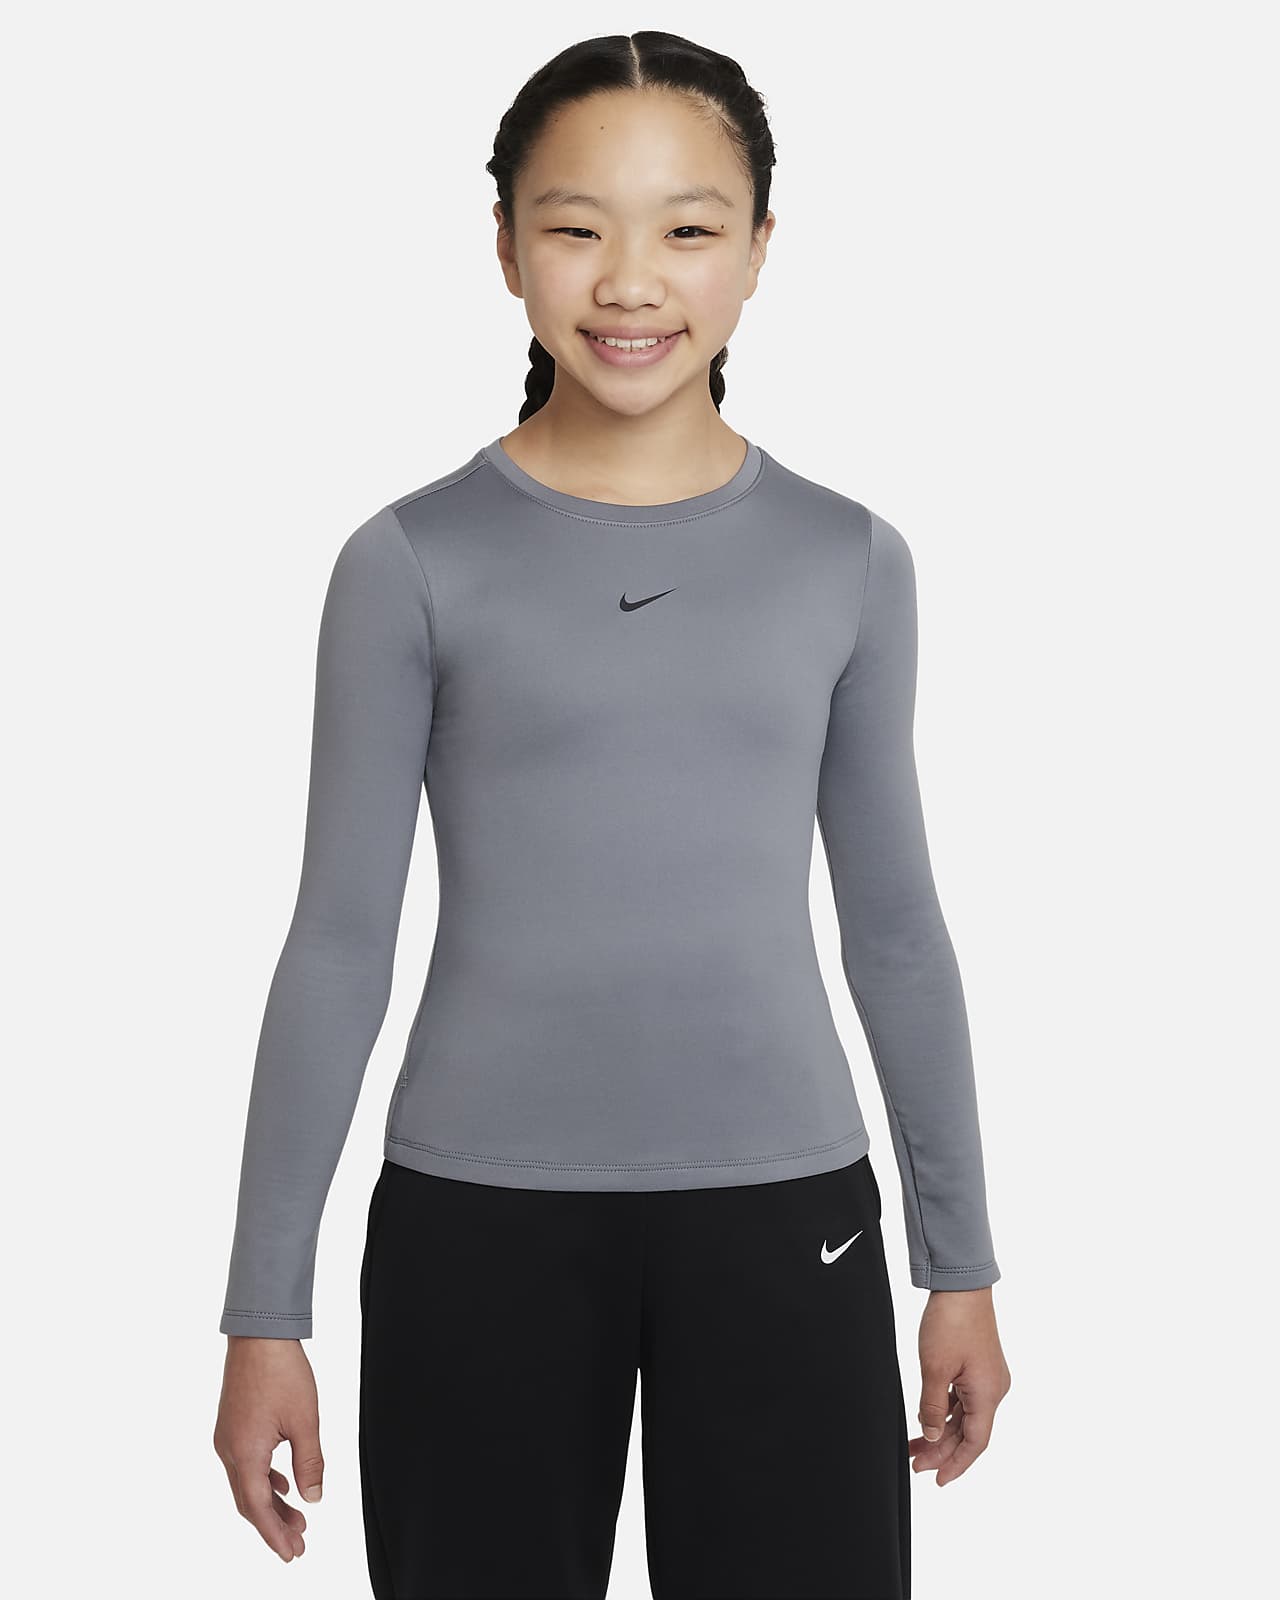 Nike One Big Kids\' Therma-FIT Long-Sleeve Training Top.